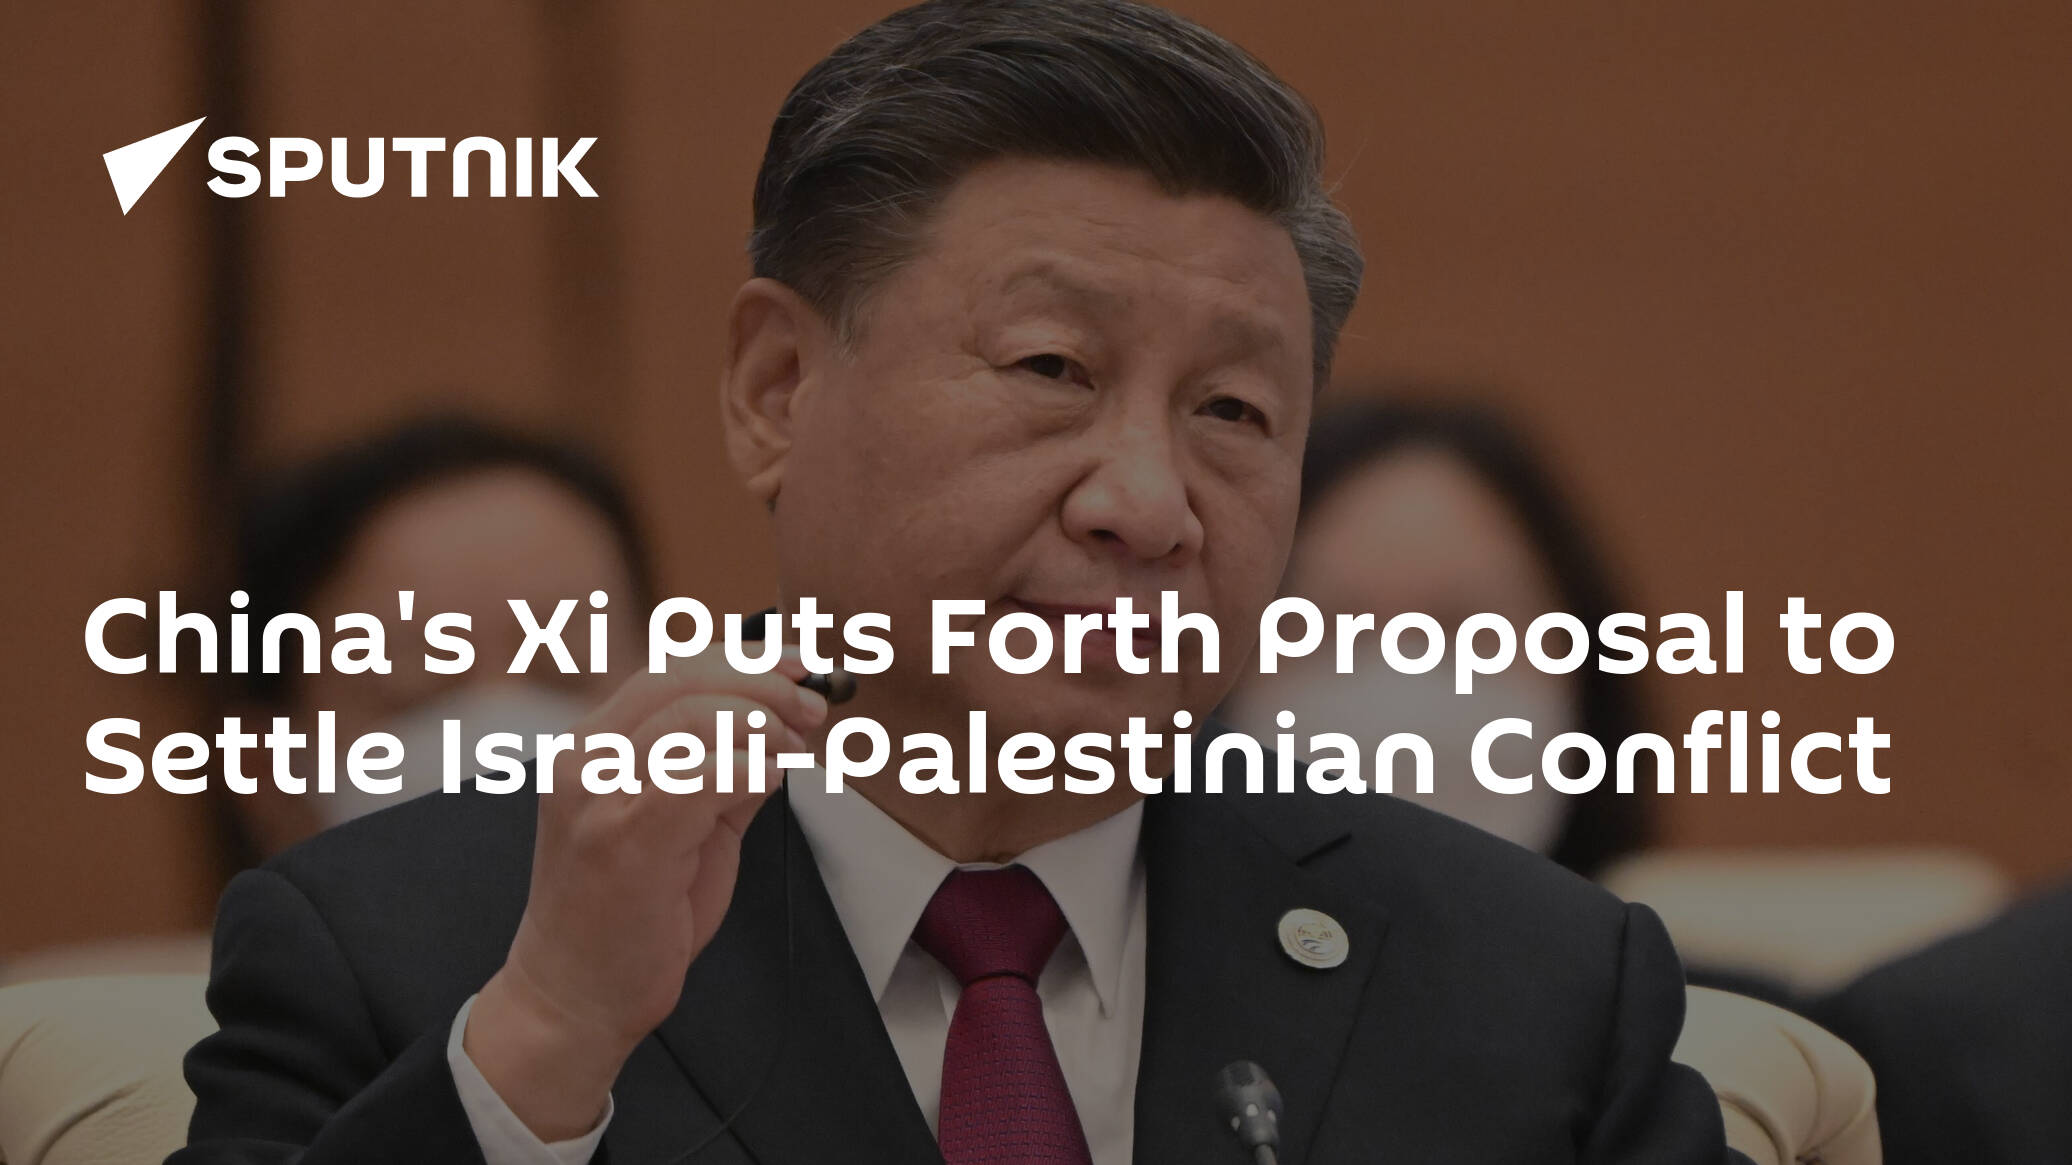 China's Xi Puts Forth Proposal to Settle Israeli-Palestinian Conflict